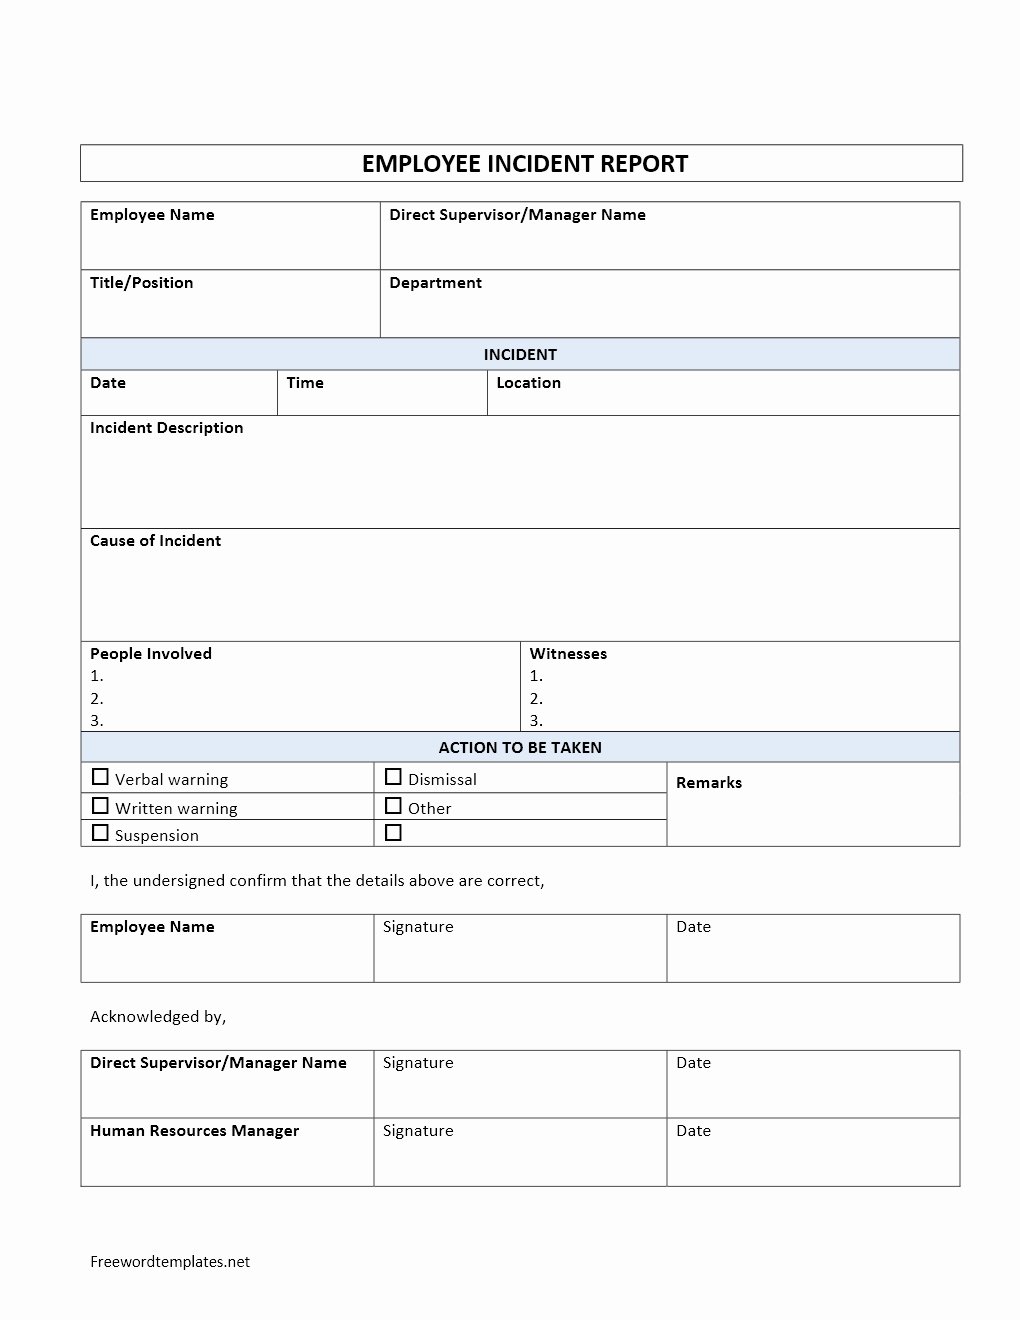 Accident Incident Reporting form Template Awesome Employee Incident Report